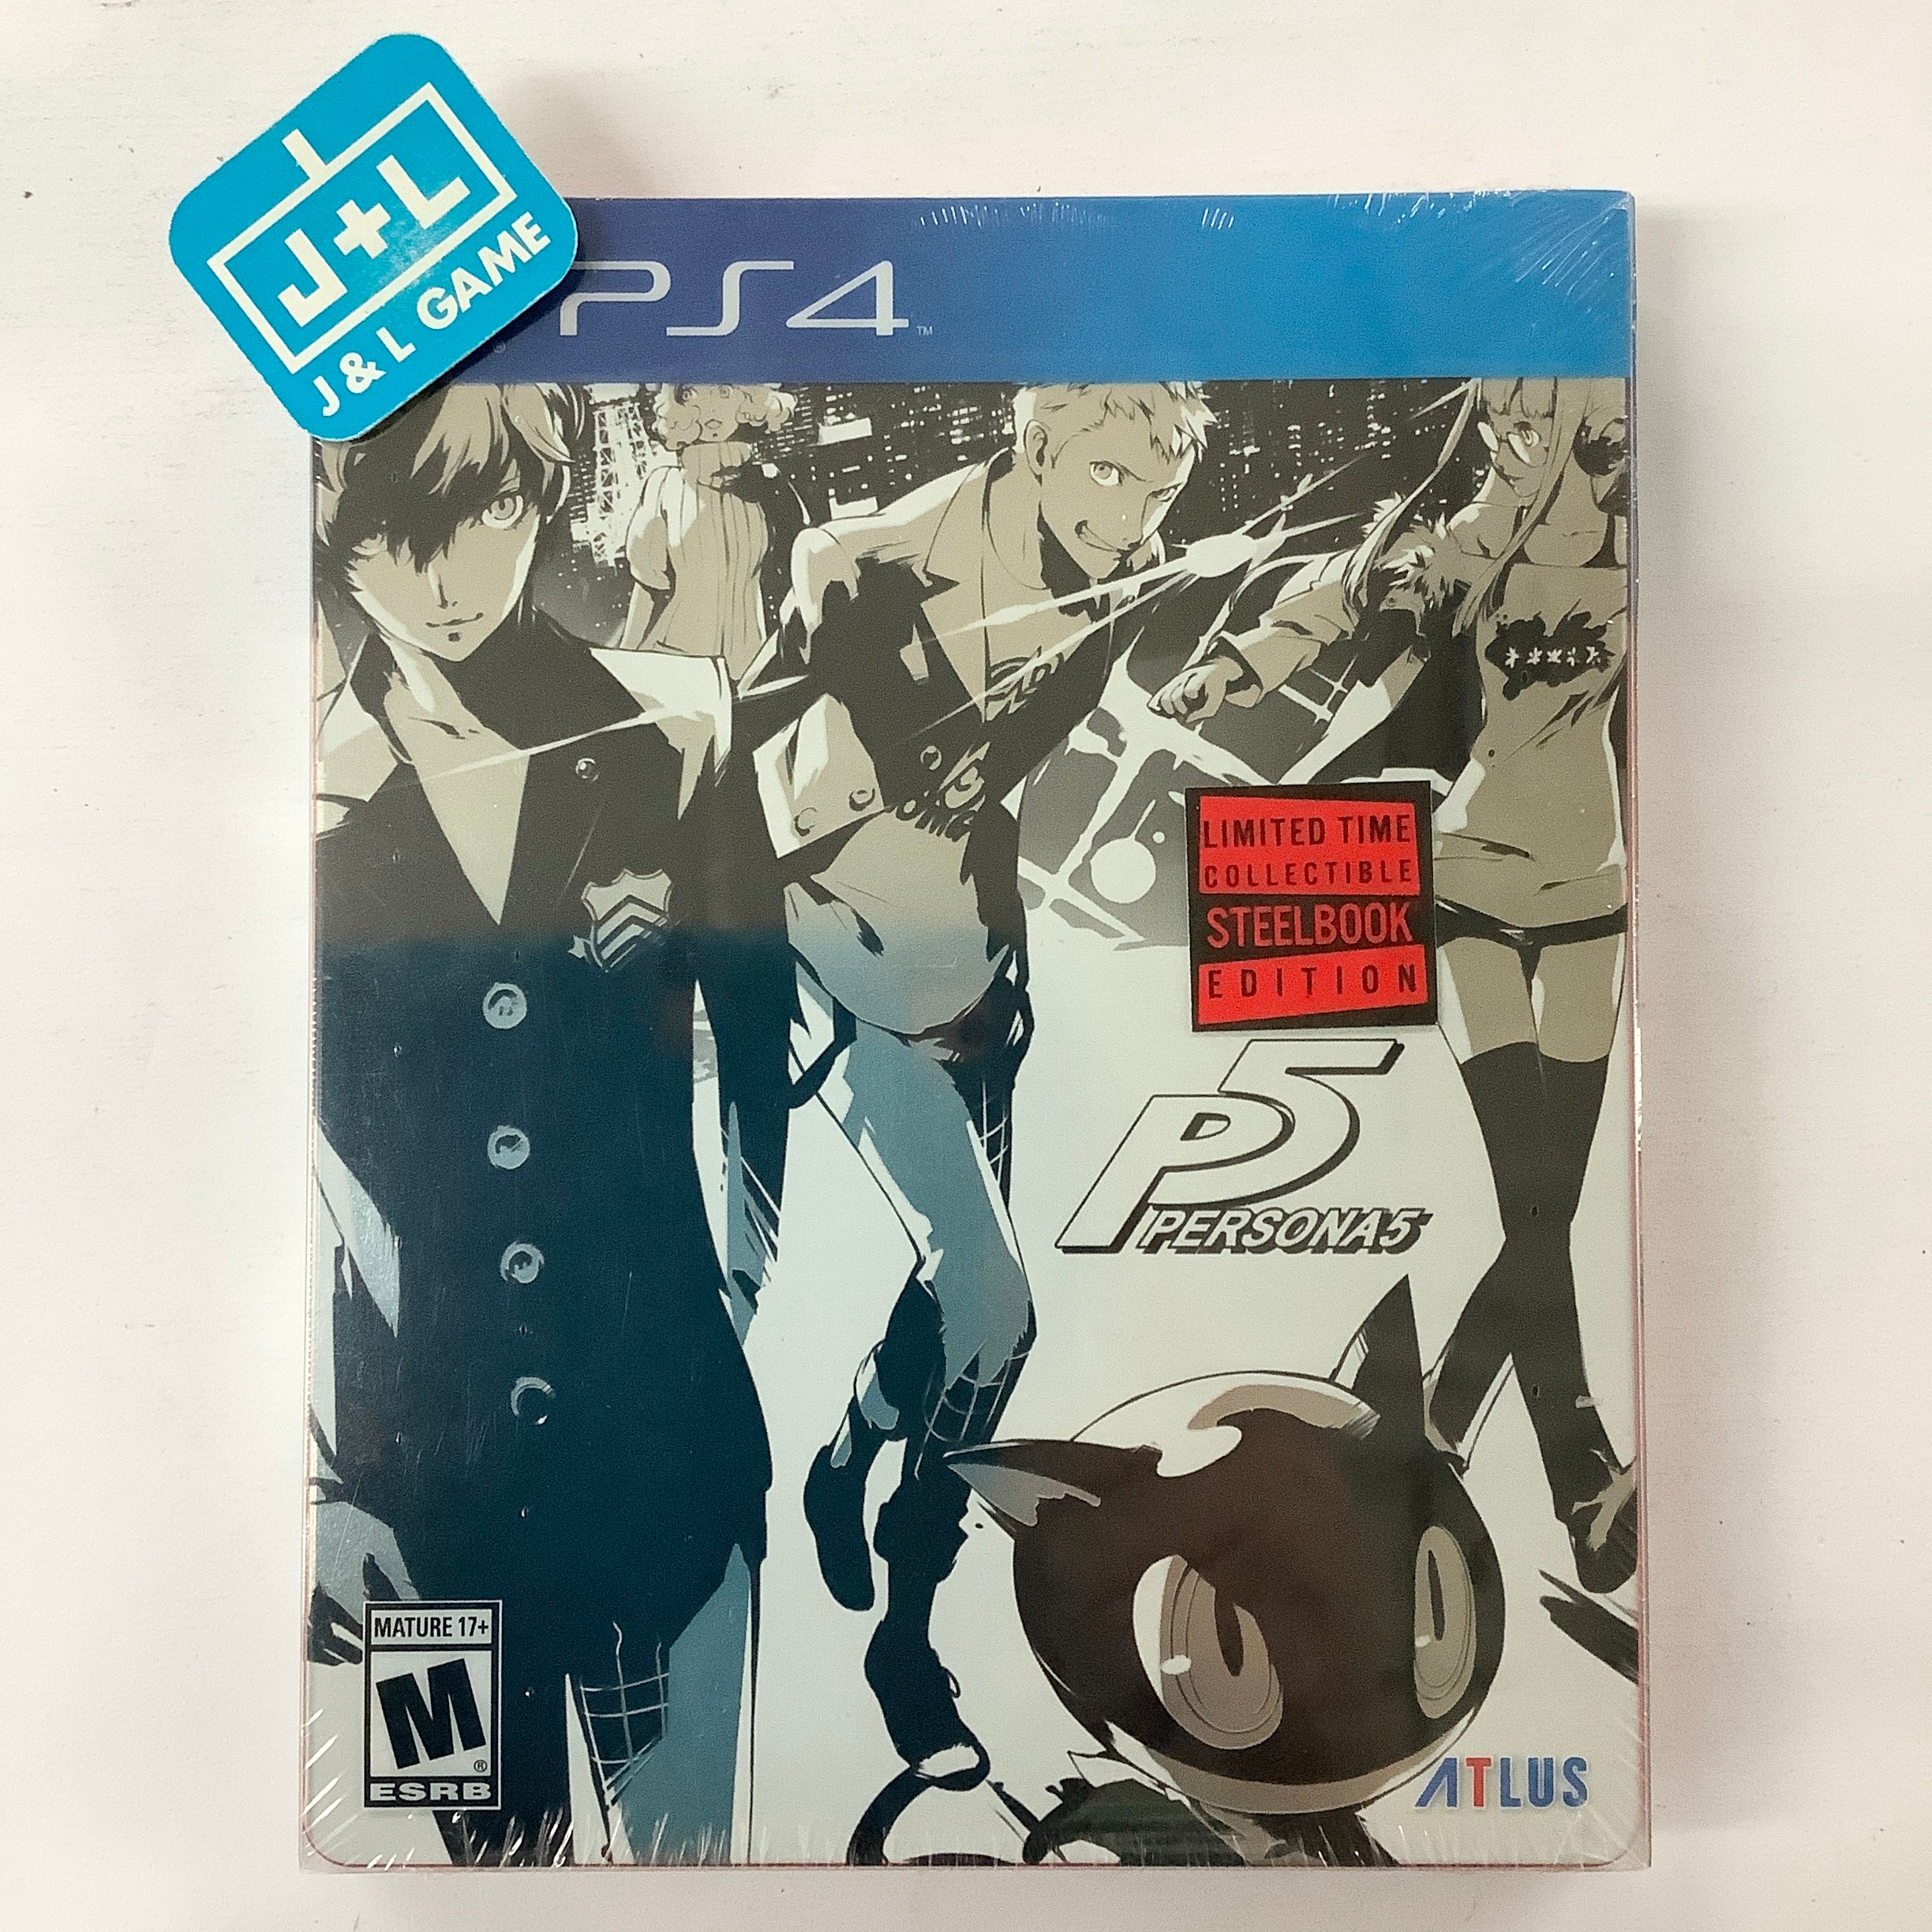 Persona 5 (Steelbook Edition) - (PS4) PlayStation 4 Video Games Atlus   